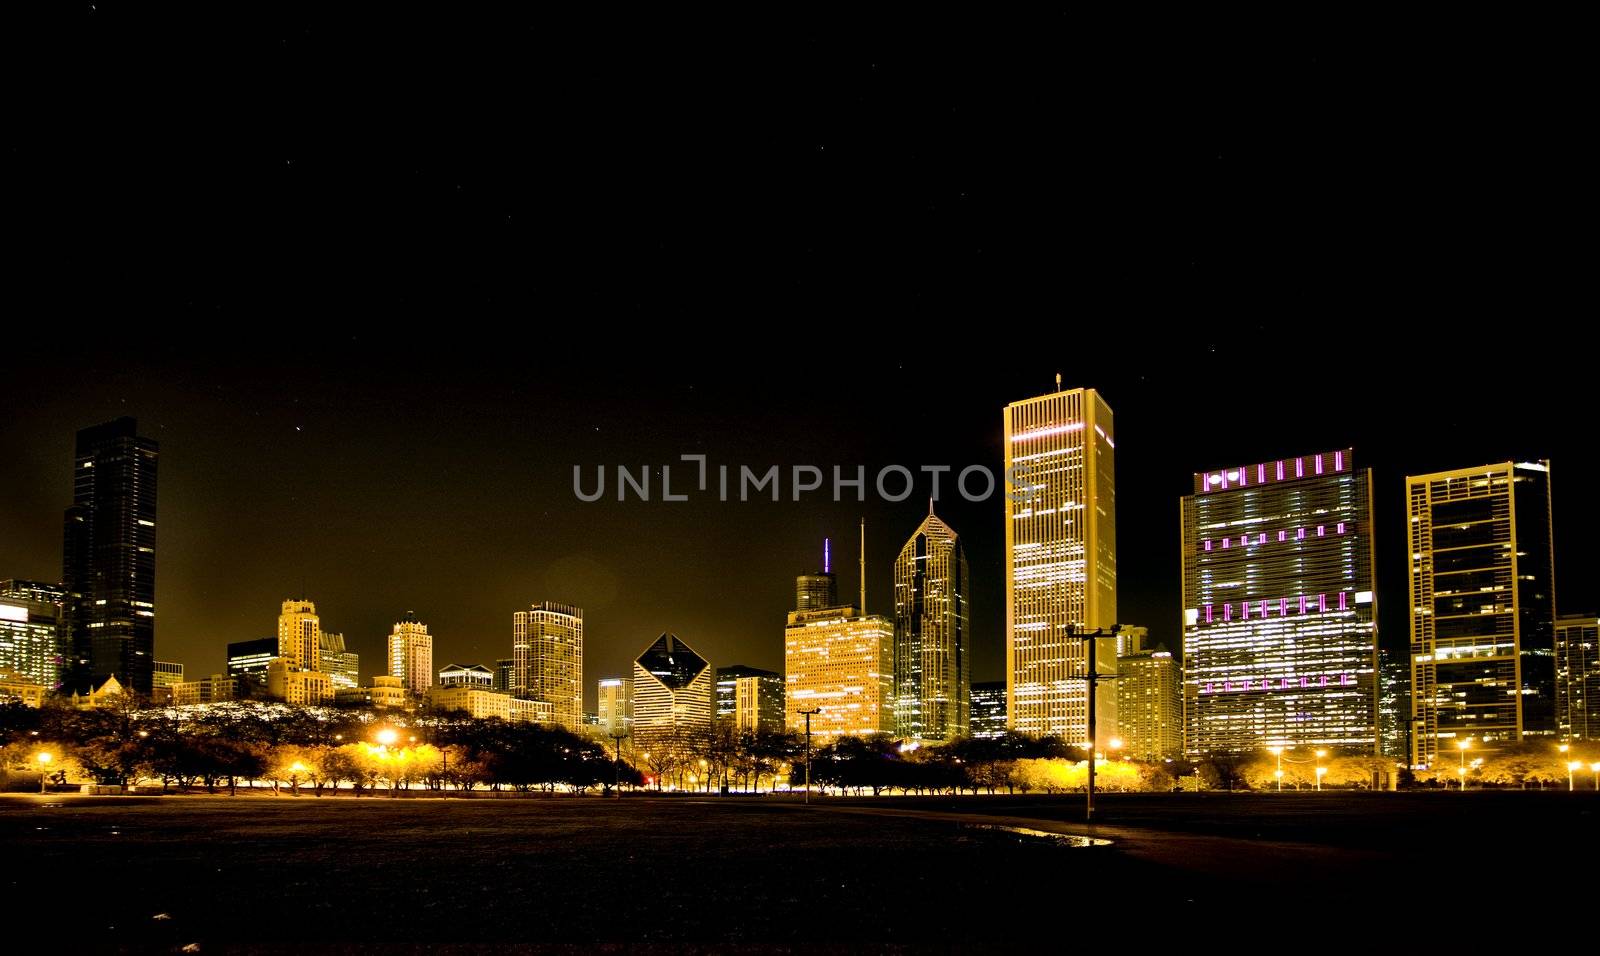 Night Photography Chicago by pictureguy